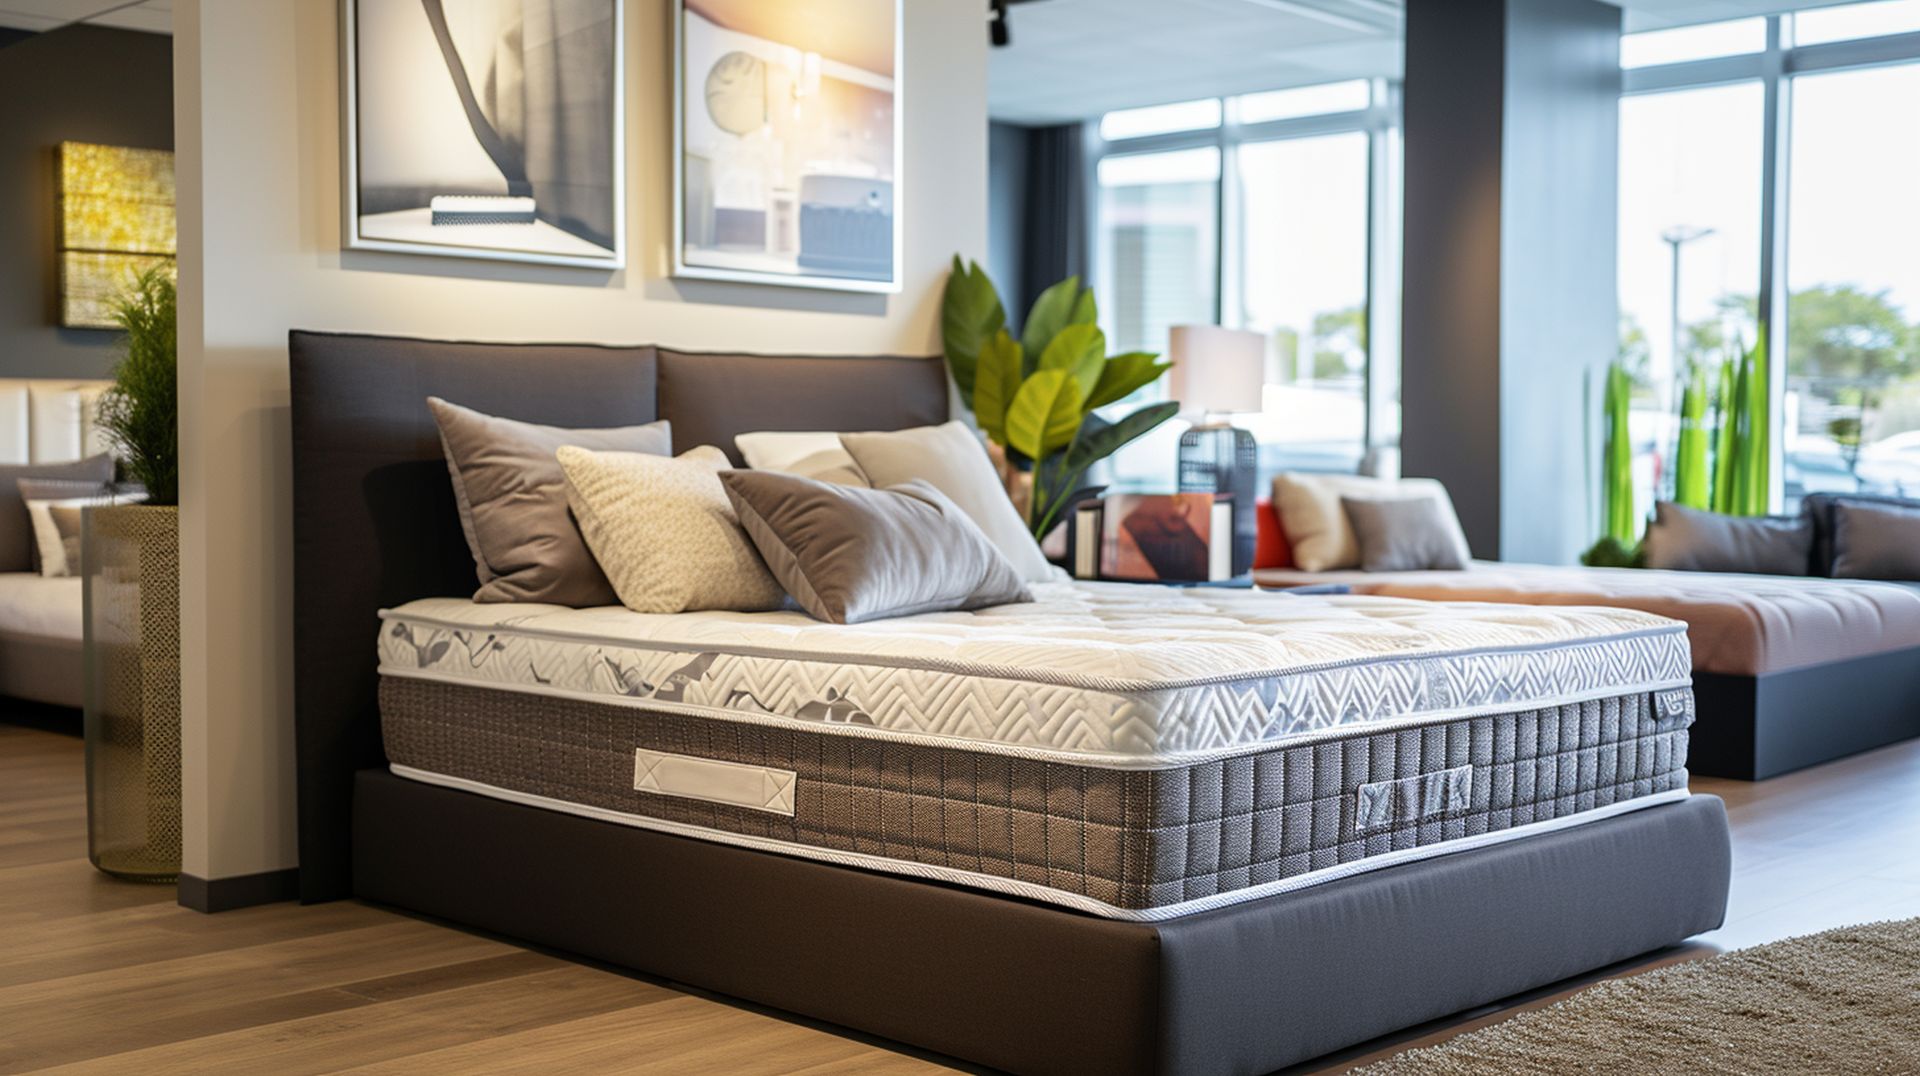 If you're looking for a new bed, mattress stores in Tuscaloosa offer the best customer and delivery service, financing, and warranties in Alabama